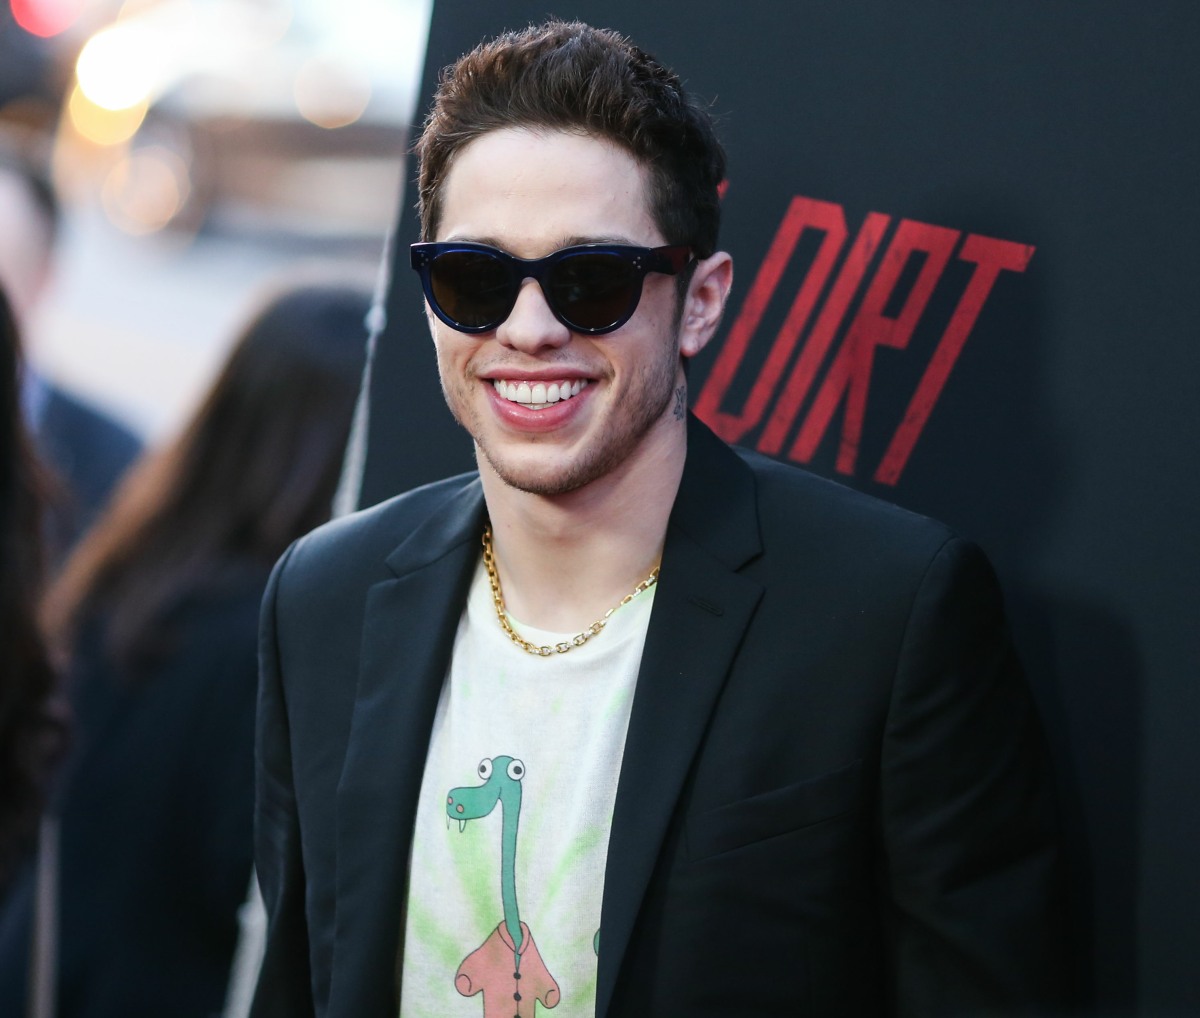 Comedian Pete Davidson arrives at the Los Angeles Premiere Of Netflix's 'The Dirt' held at ArcLight Cinemas Hollywood on March 18, 2019 in Hollywood, Los Angeles, California, United States. (Photo by Xavier Collin/Image Press Agency)